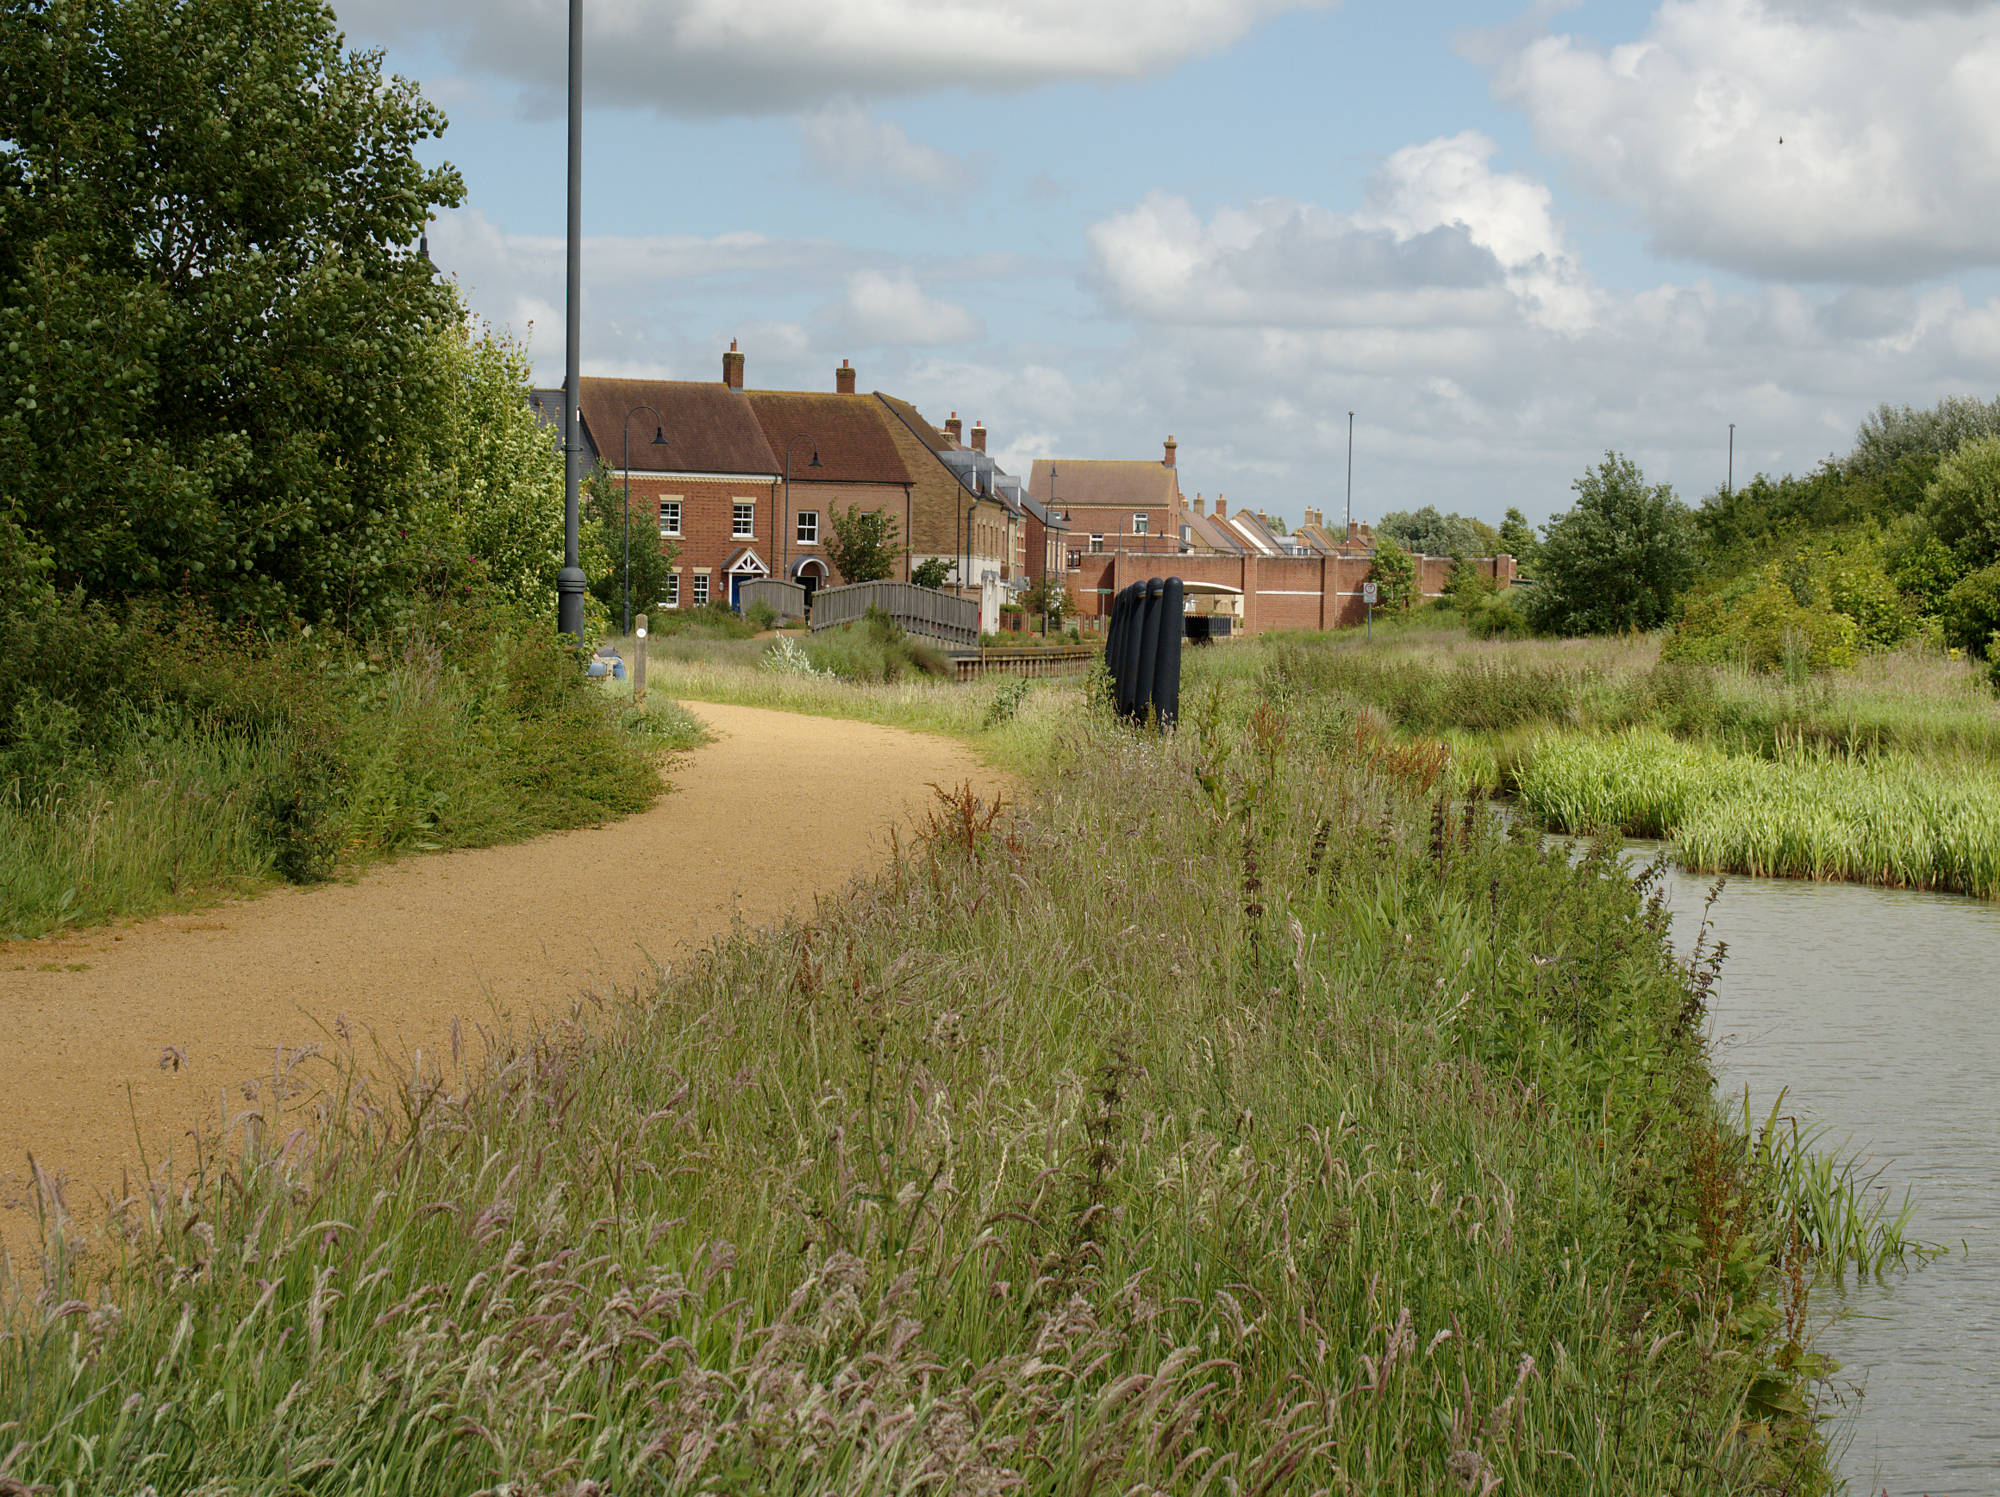 Photo of the canal with long grass on the banks